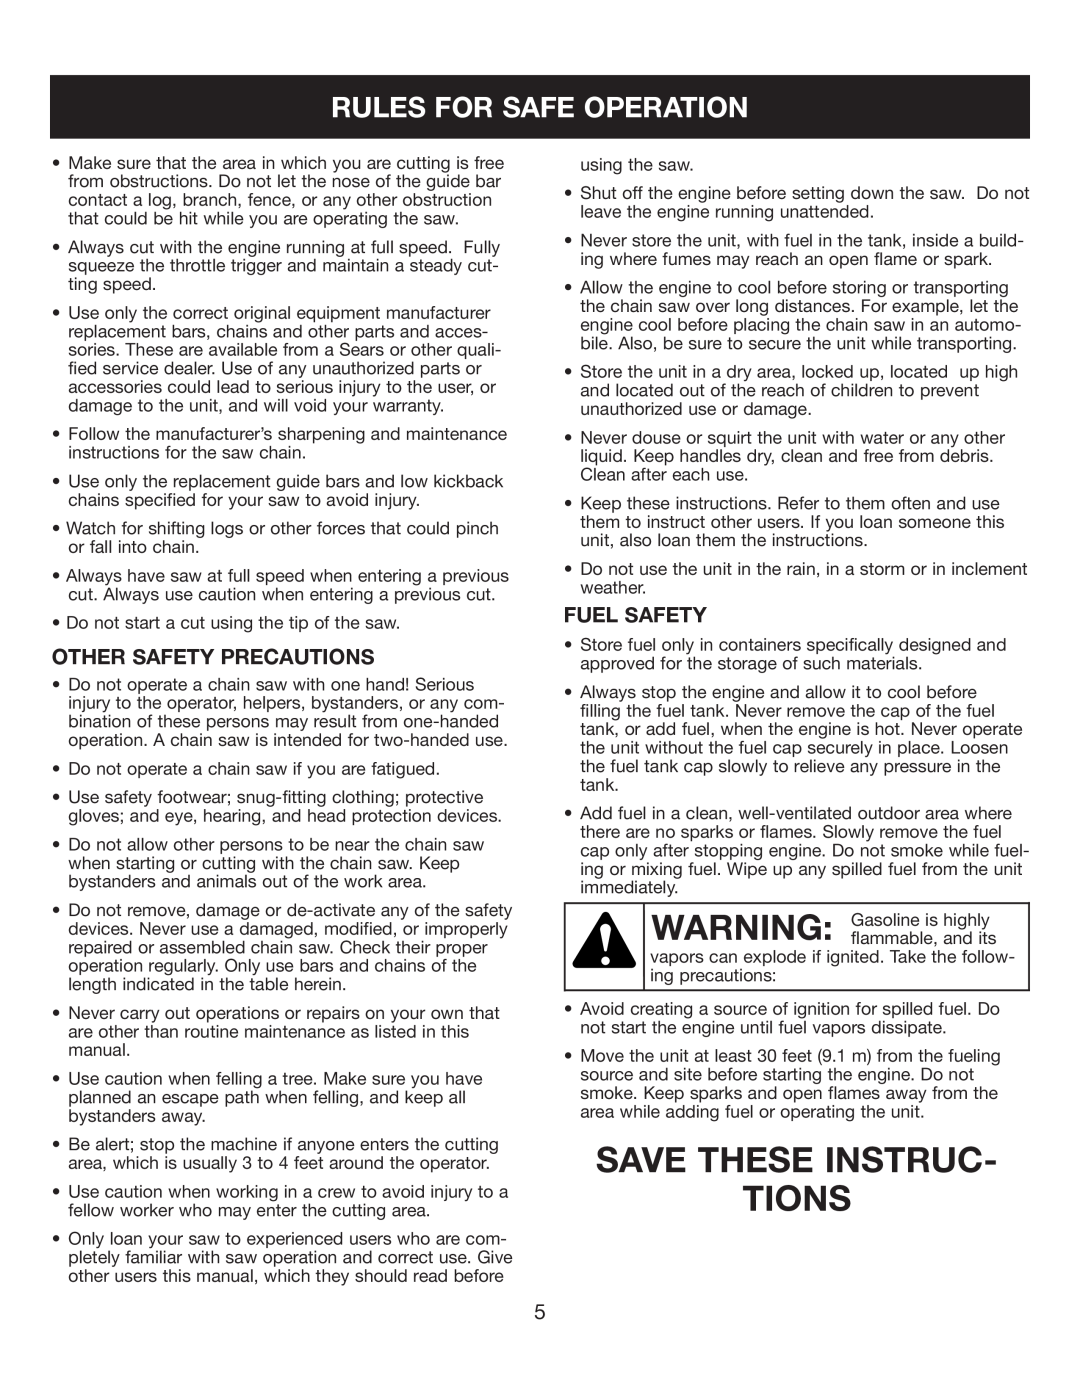 Sears 316.35084 manual Save These Instruc Tions, Rules For Safe Operation, Other Safety Precautions, Fuel Safety 